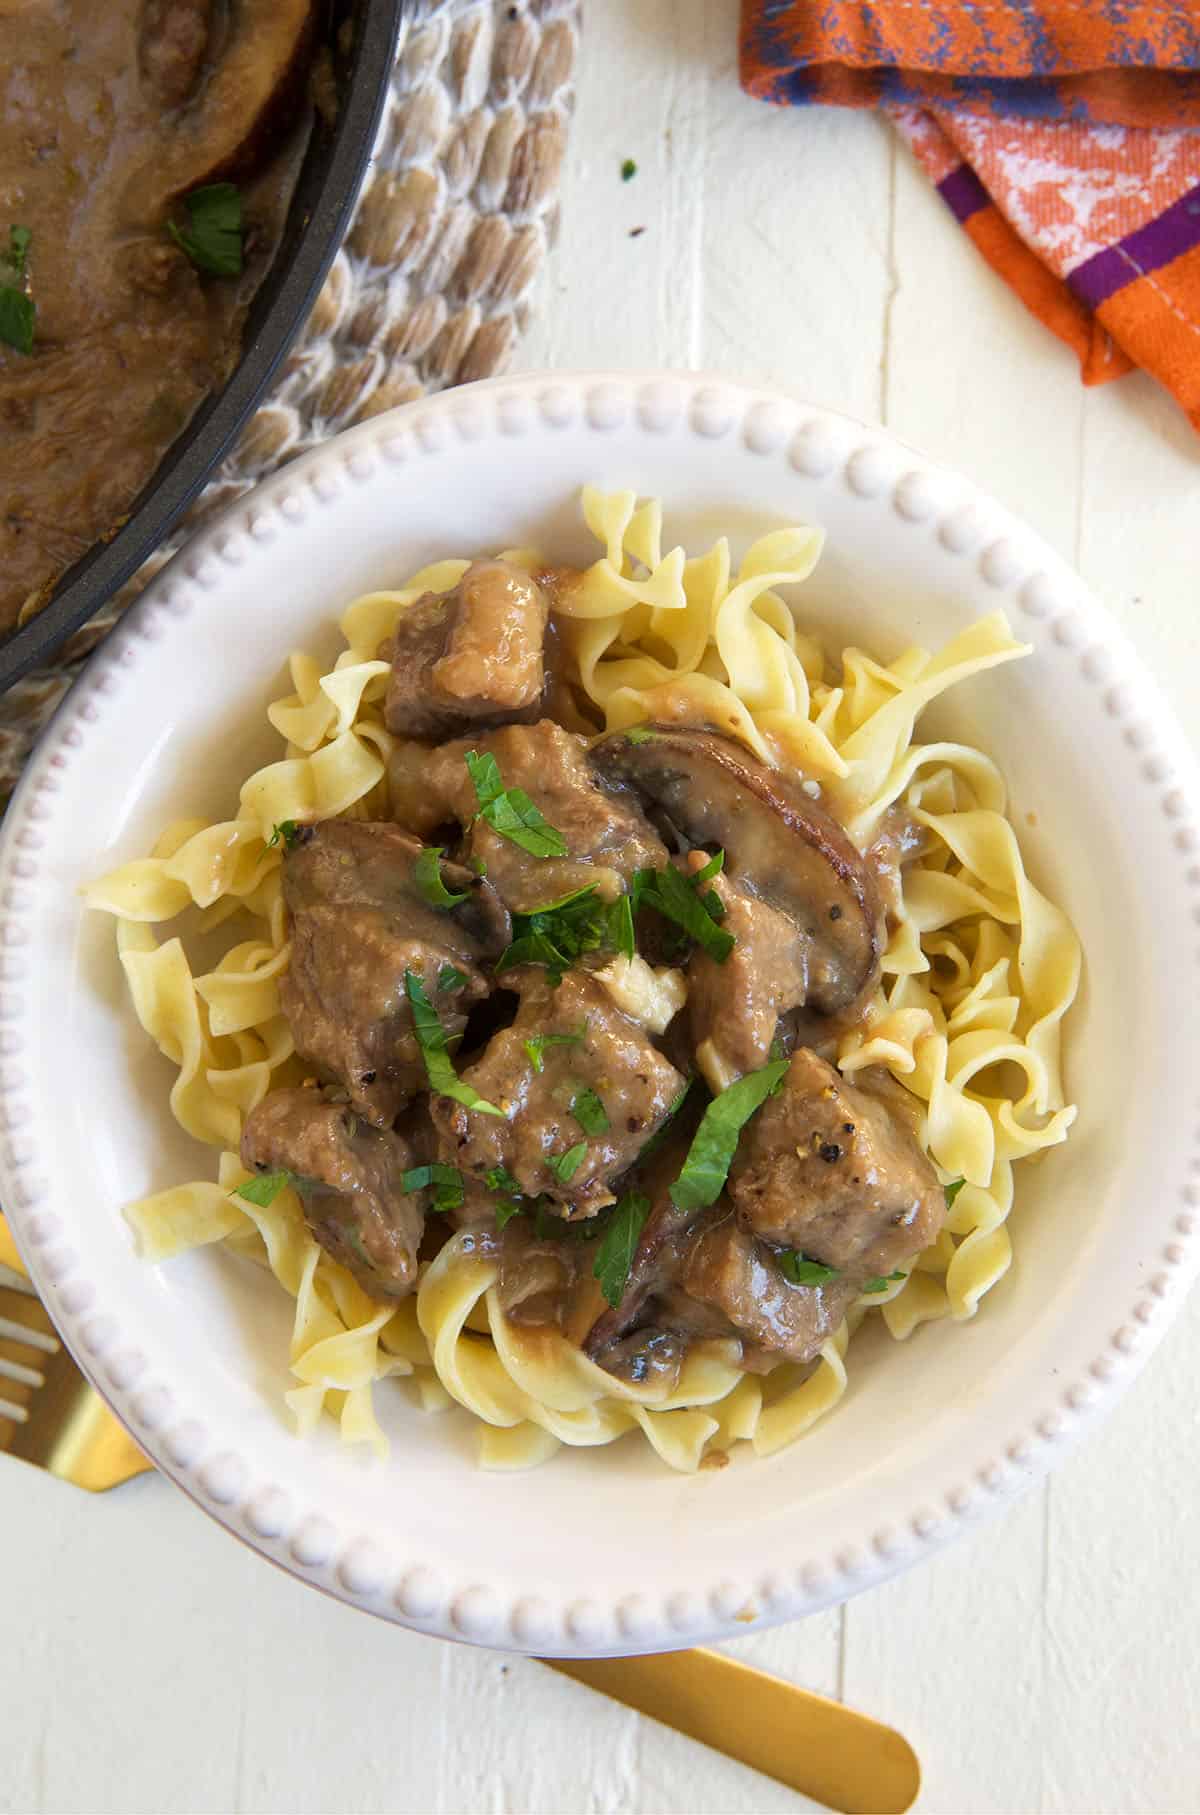 Egg noodles are topped with gravy coated beef tips.